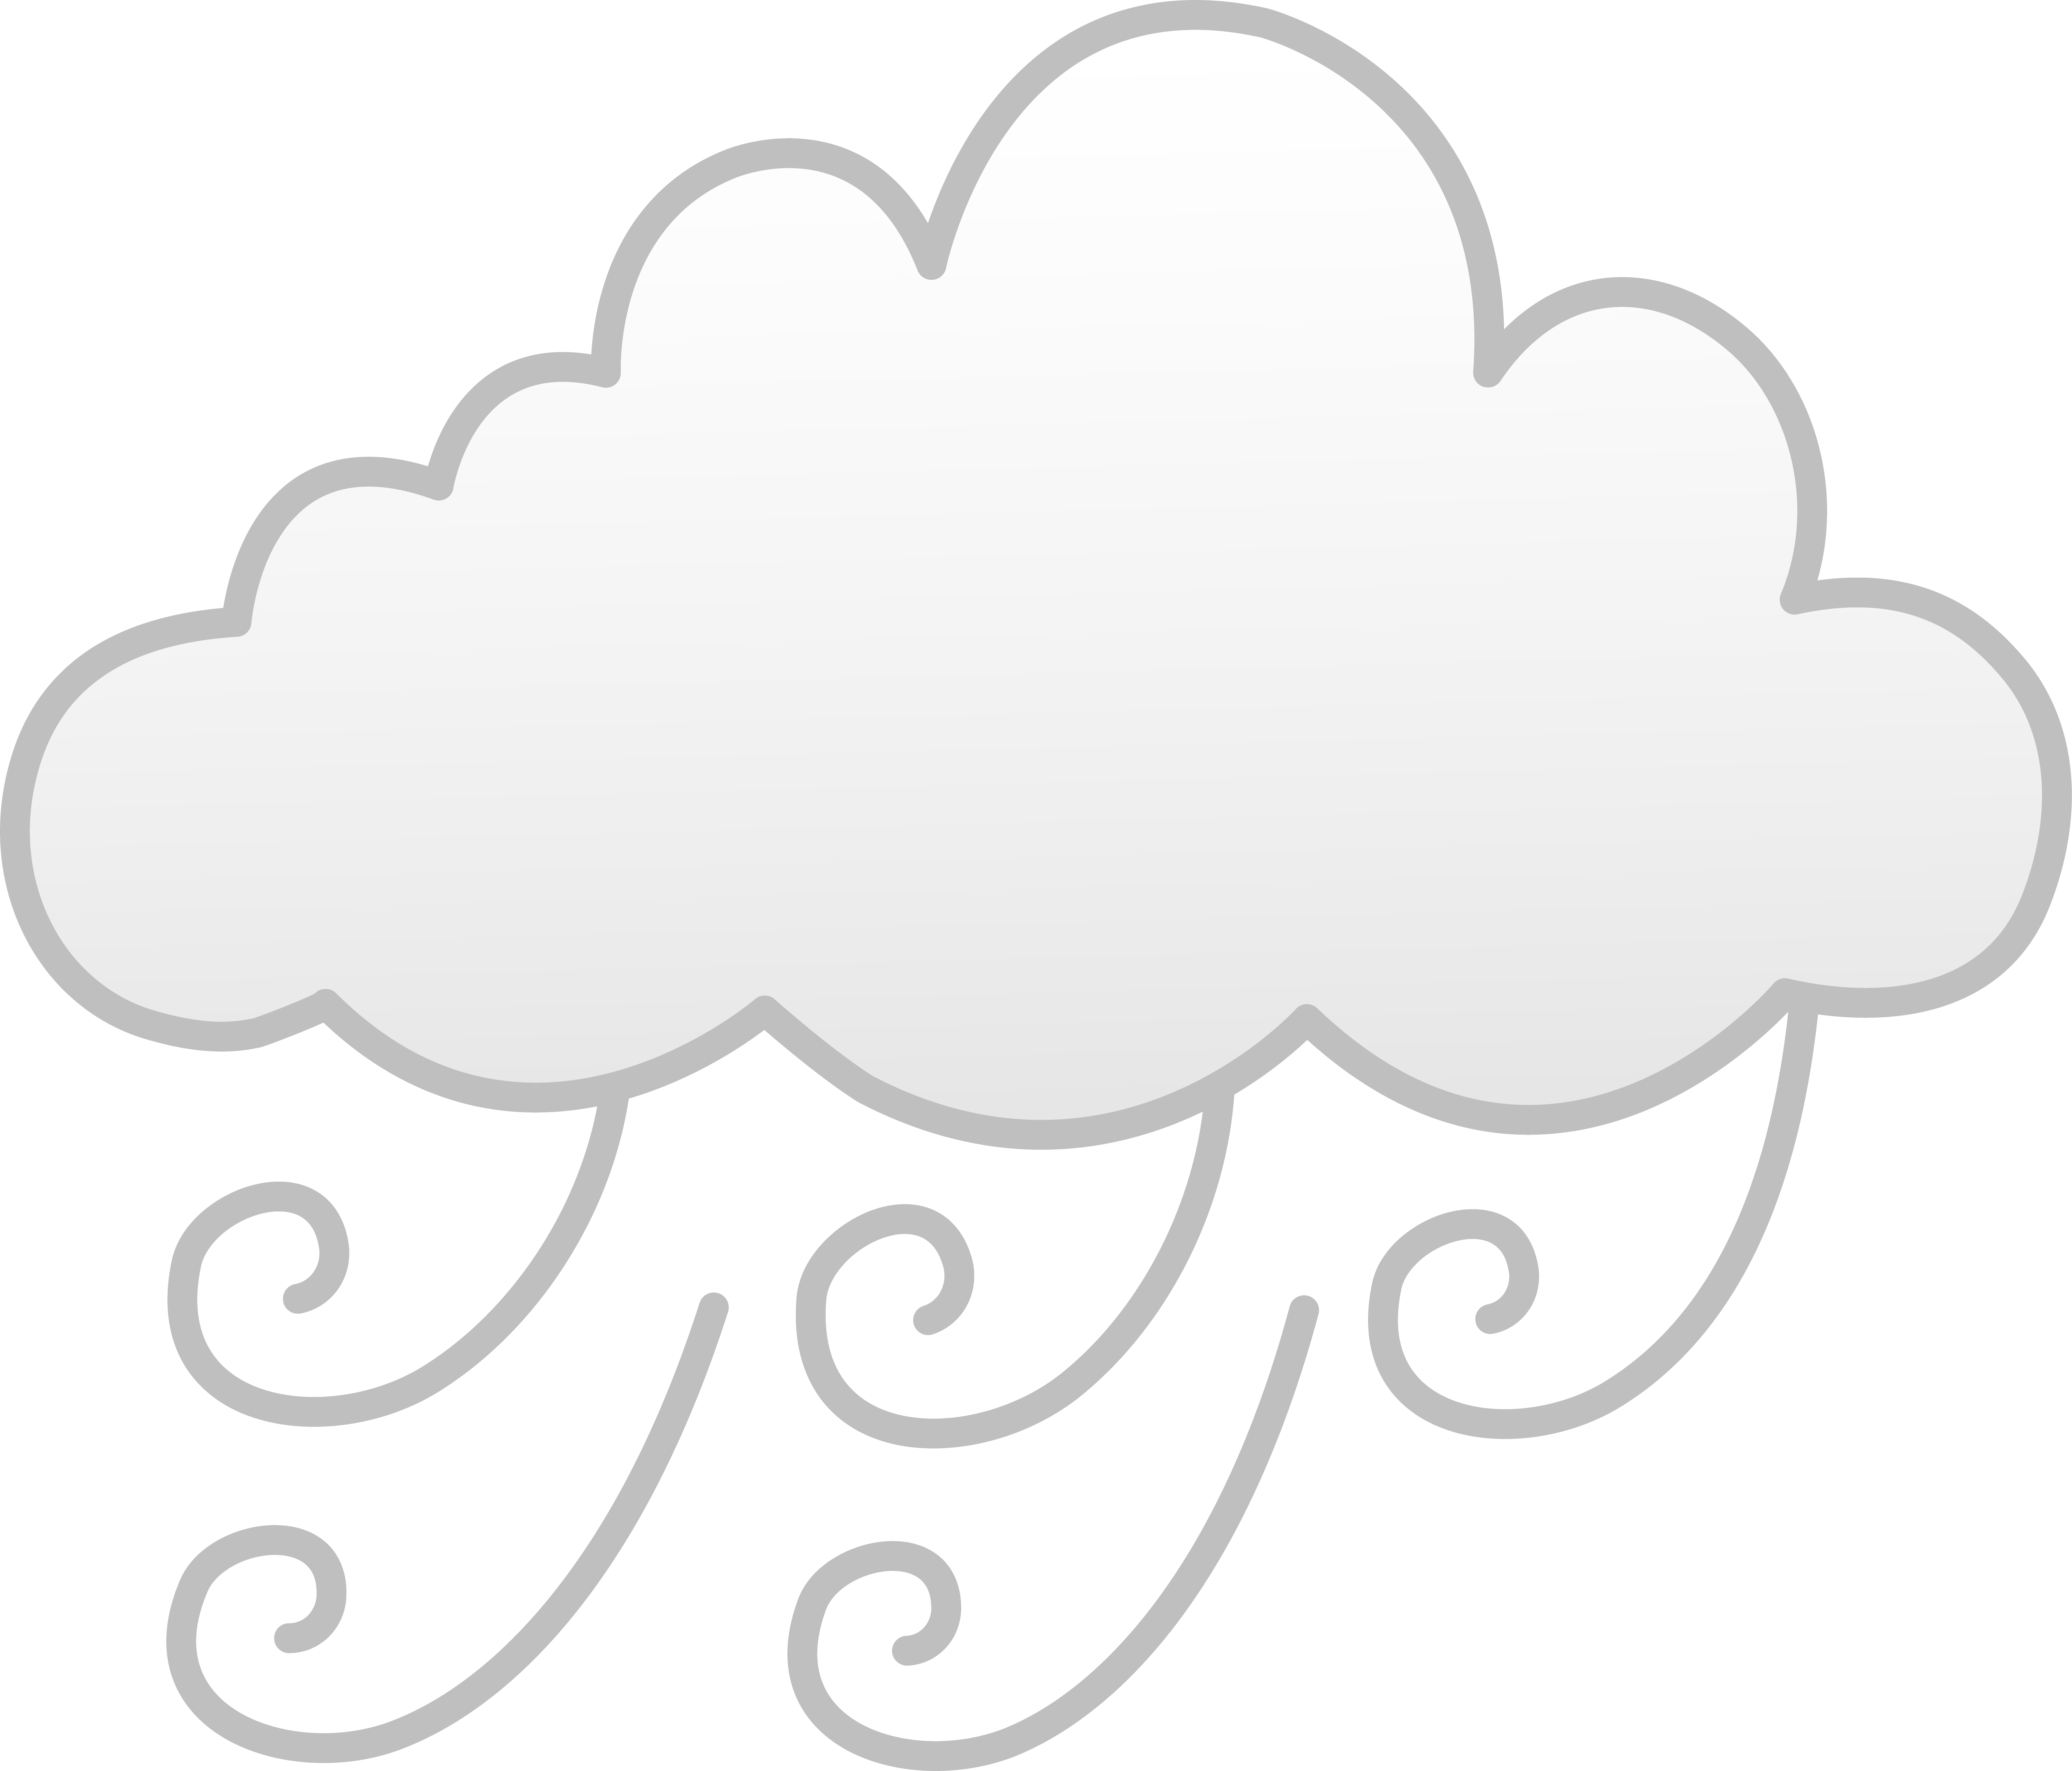 Clouds clip art cliparts. Words clipart weather